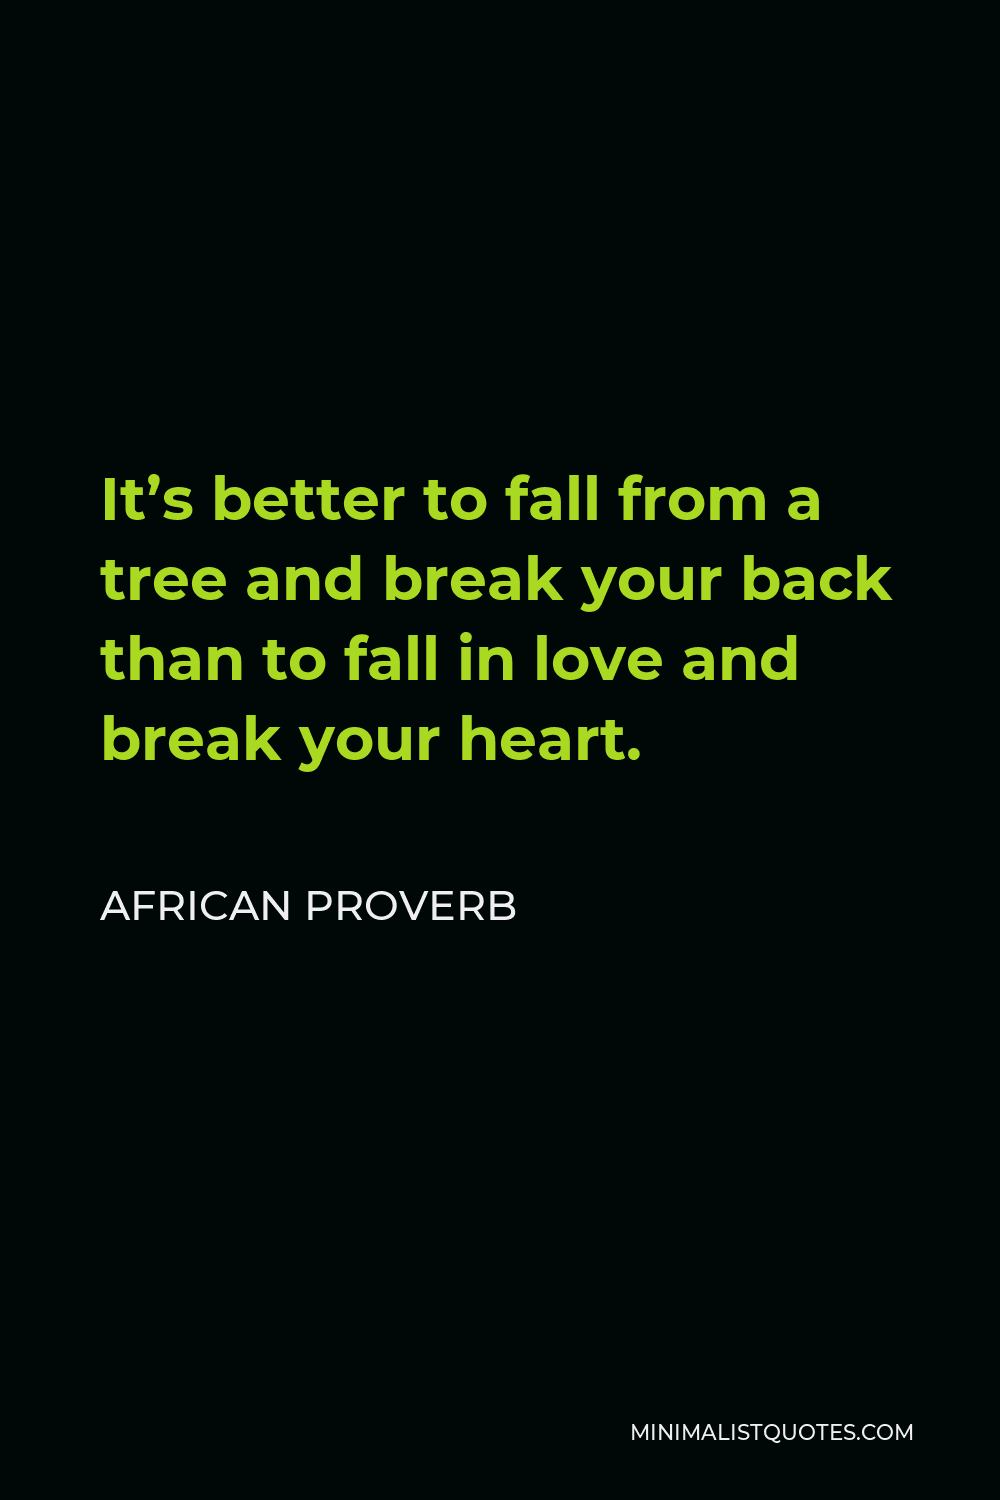 African Proverb Quote - It’s better to fall from a tree and break your back than to fall in love and break your heart.